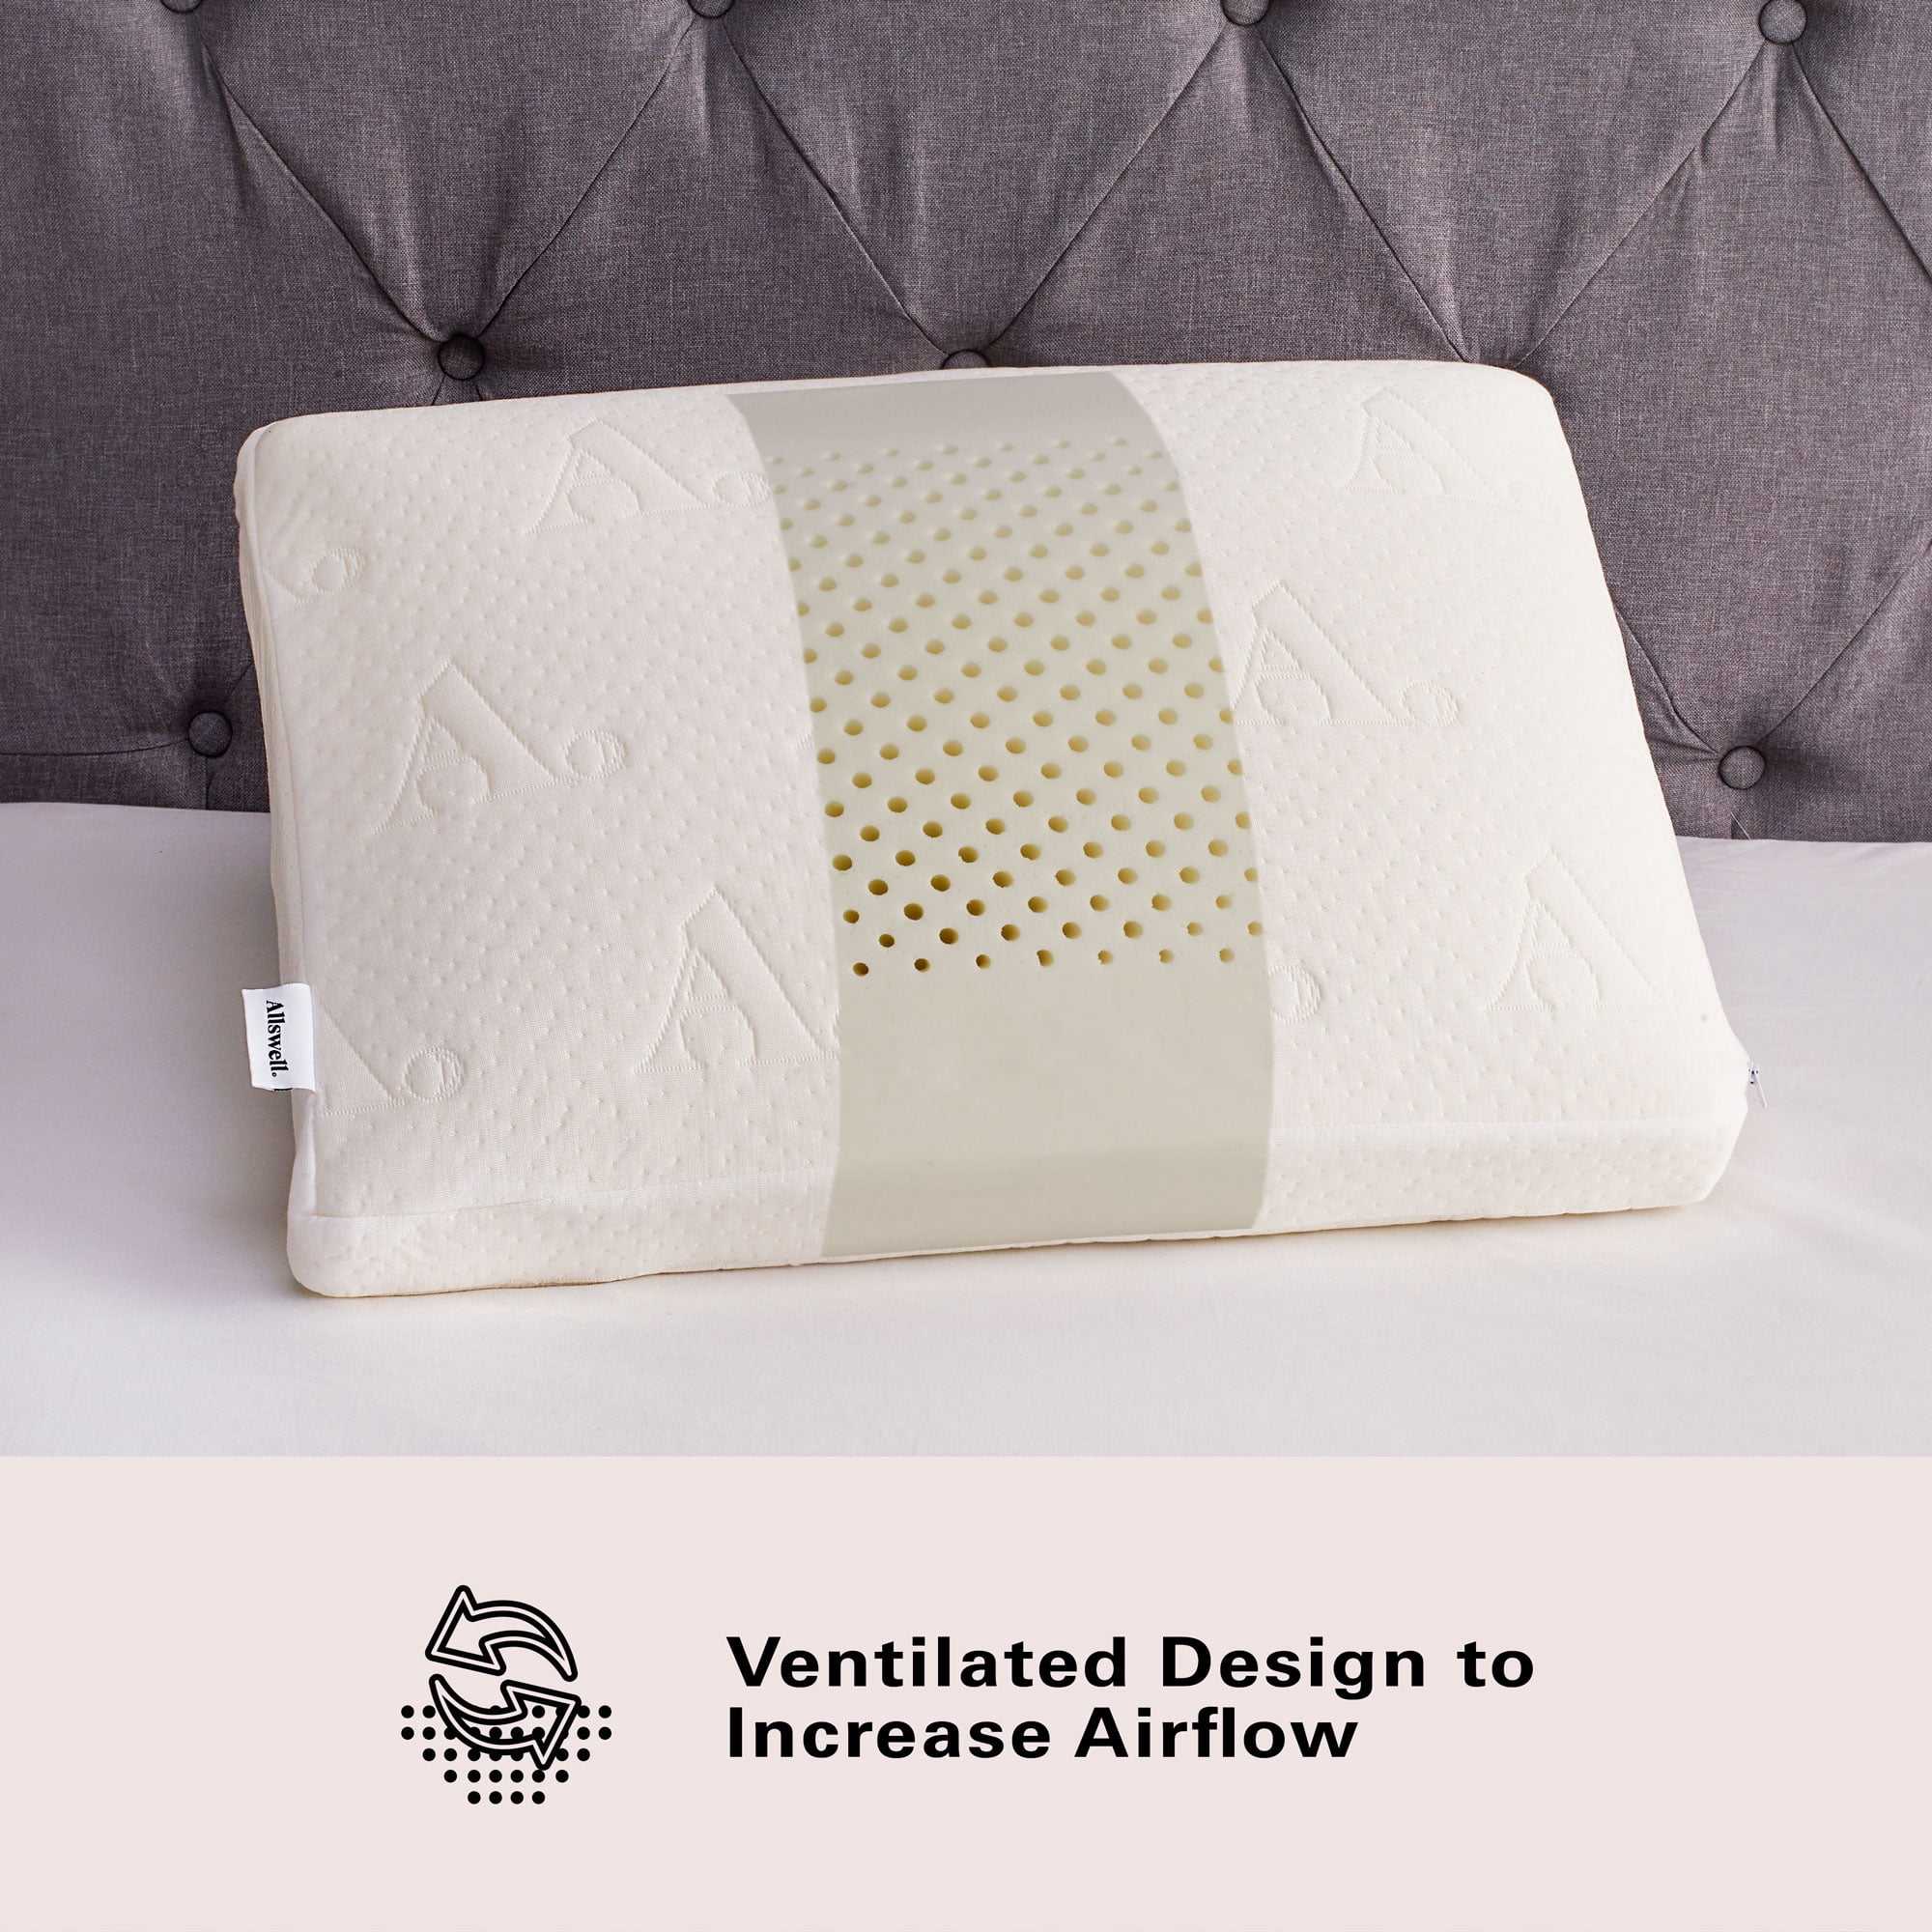 Allswell Gel Cooling Pillow